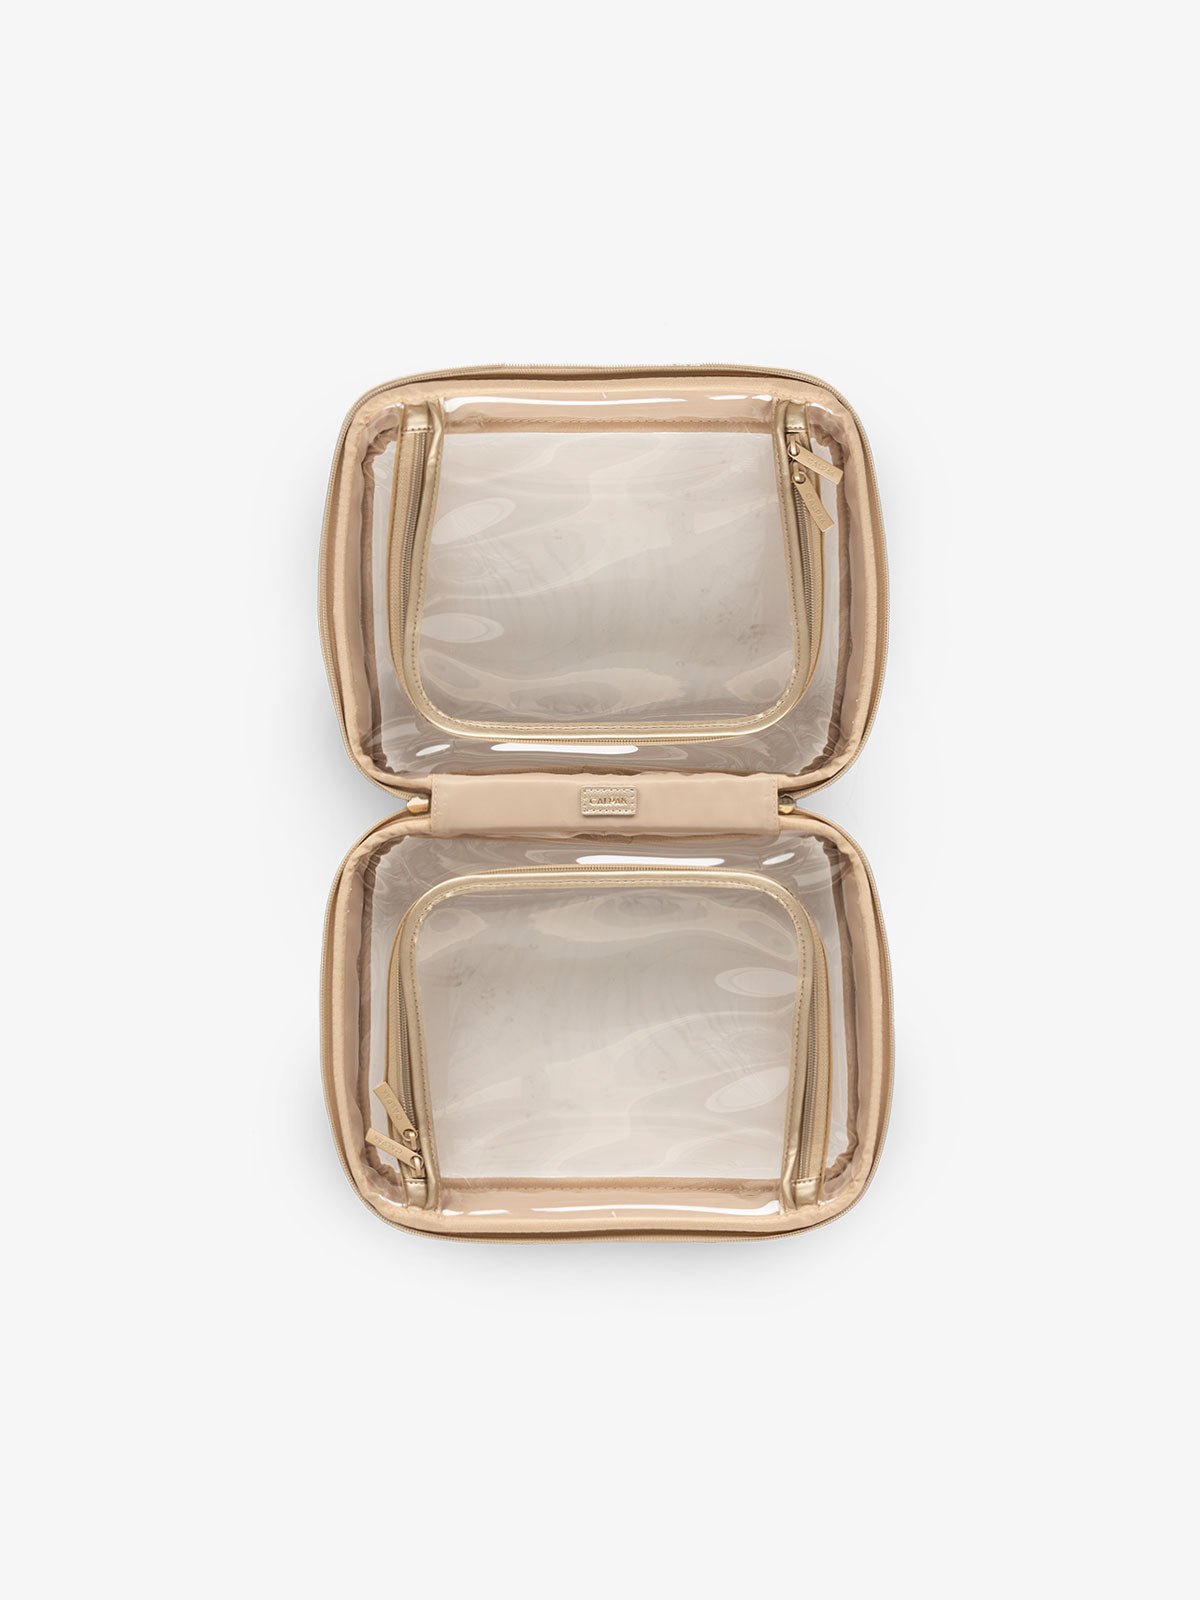 CALPAK small clear skincare bag with multiple zippered compartments in metallic gold